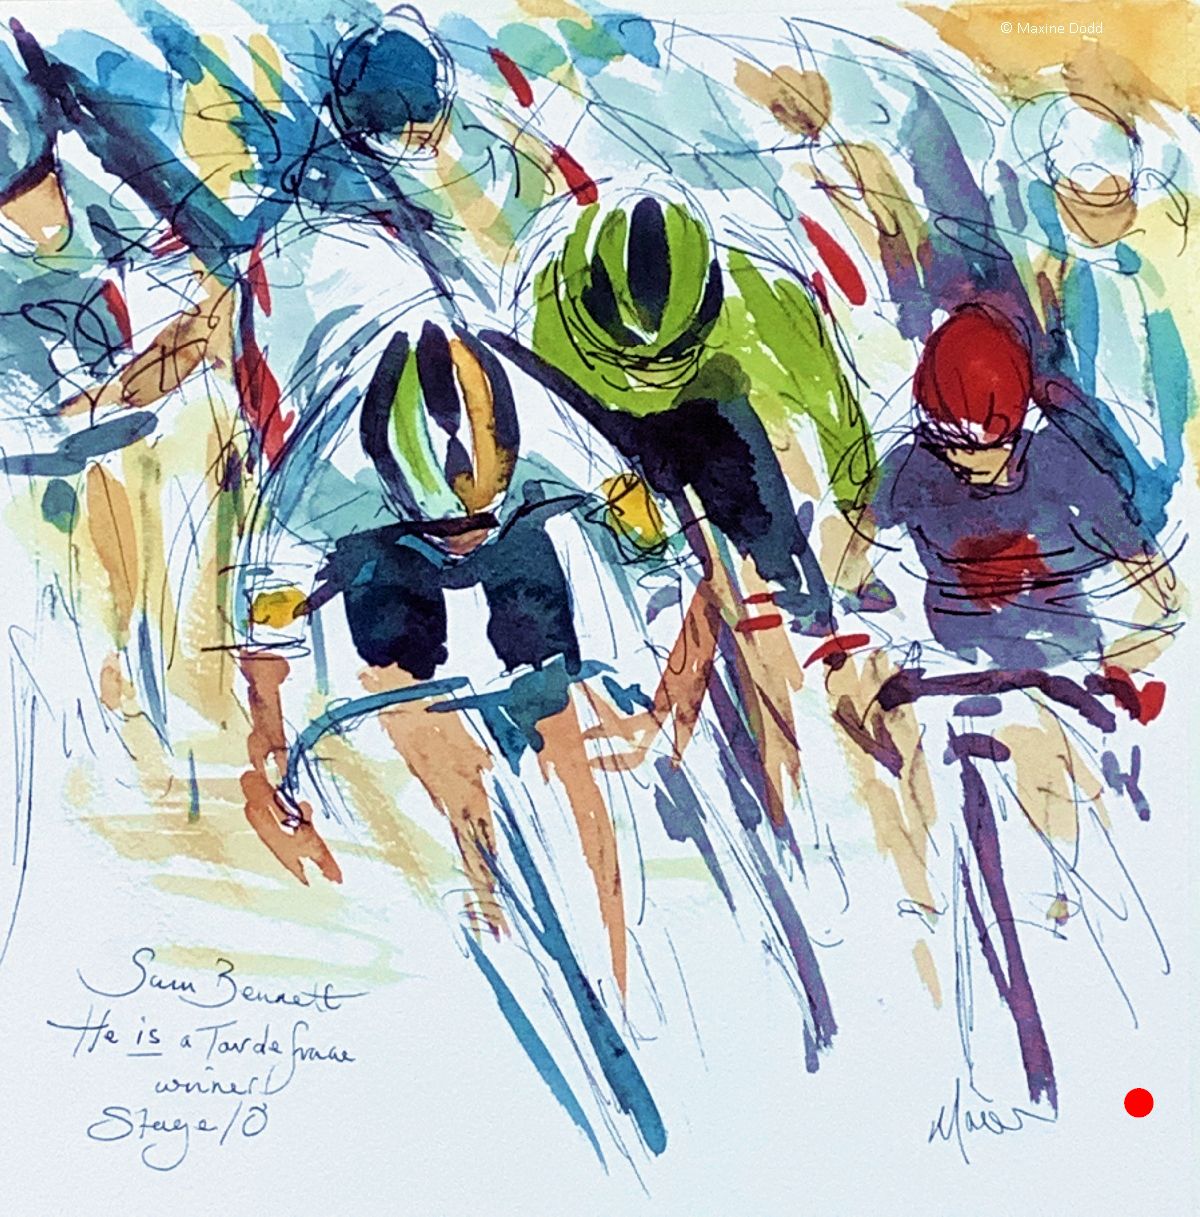 SOLD - Sam Bennett IS a Tour de France stage winner! Watercolour, pen and ink by Maxine Dodd